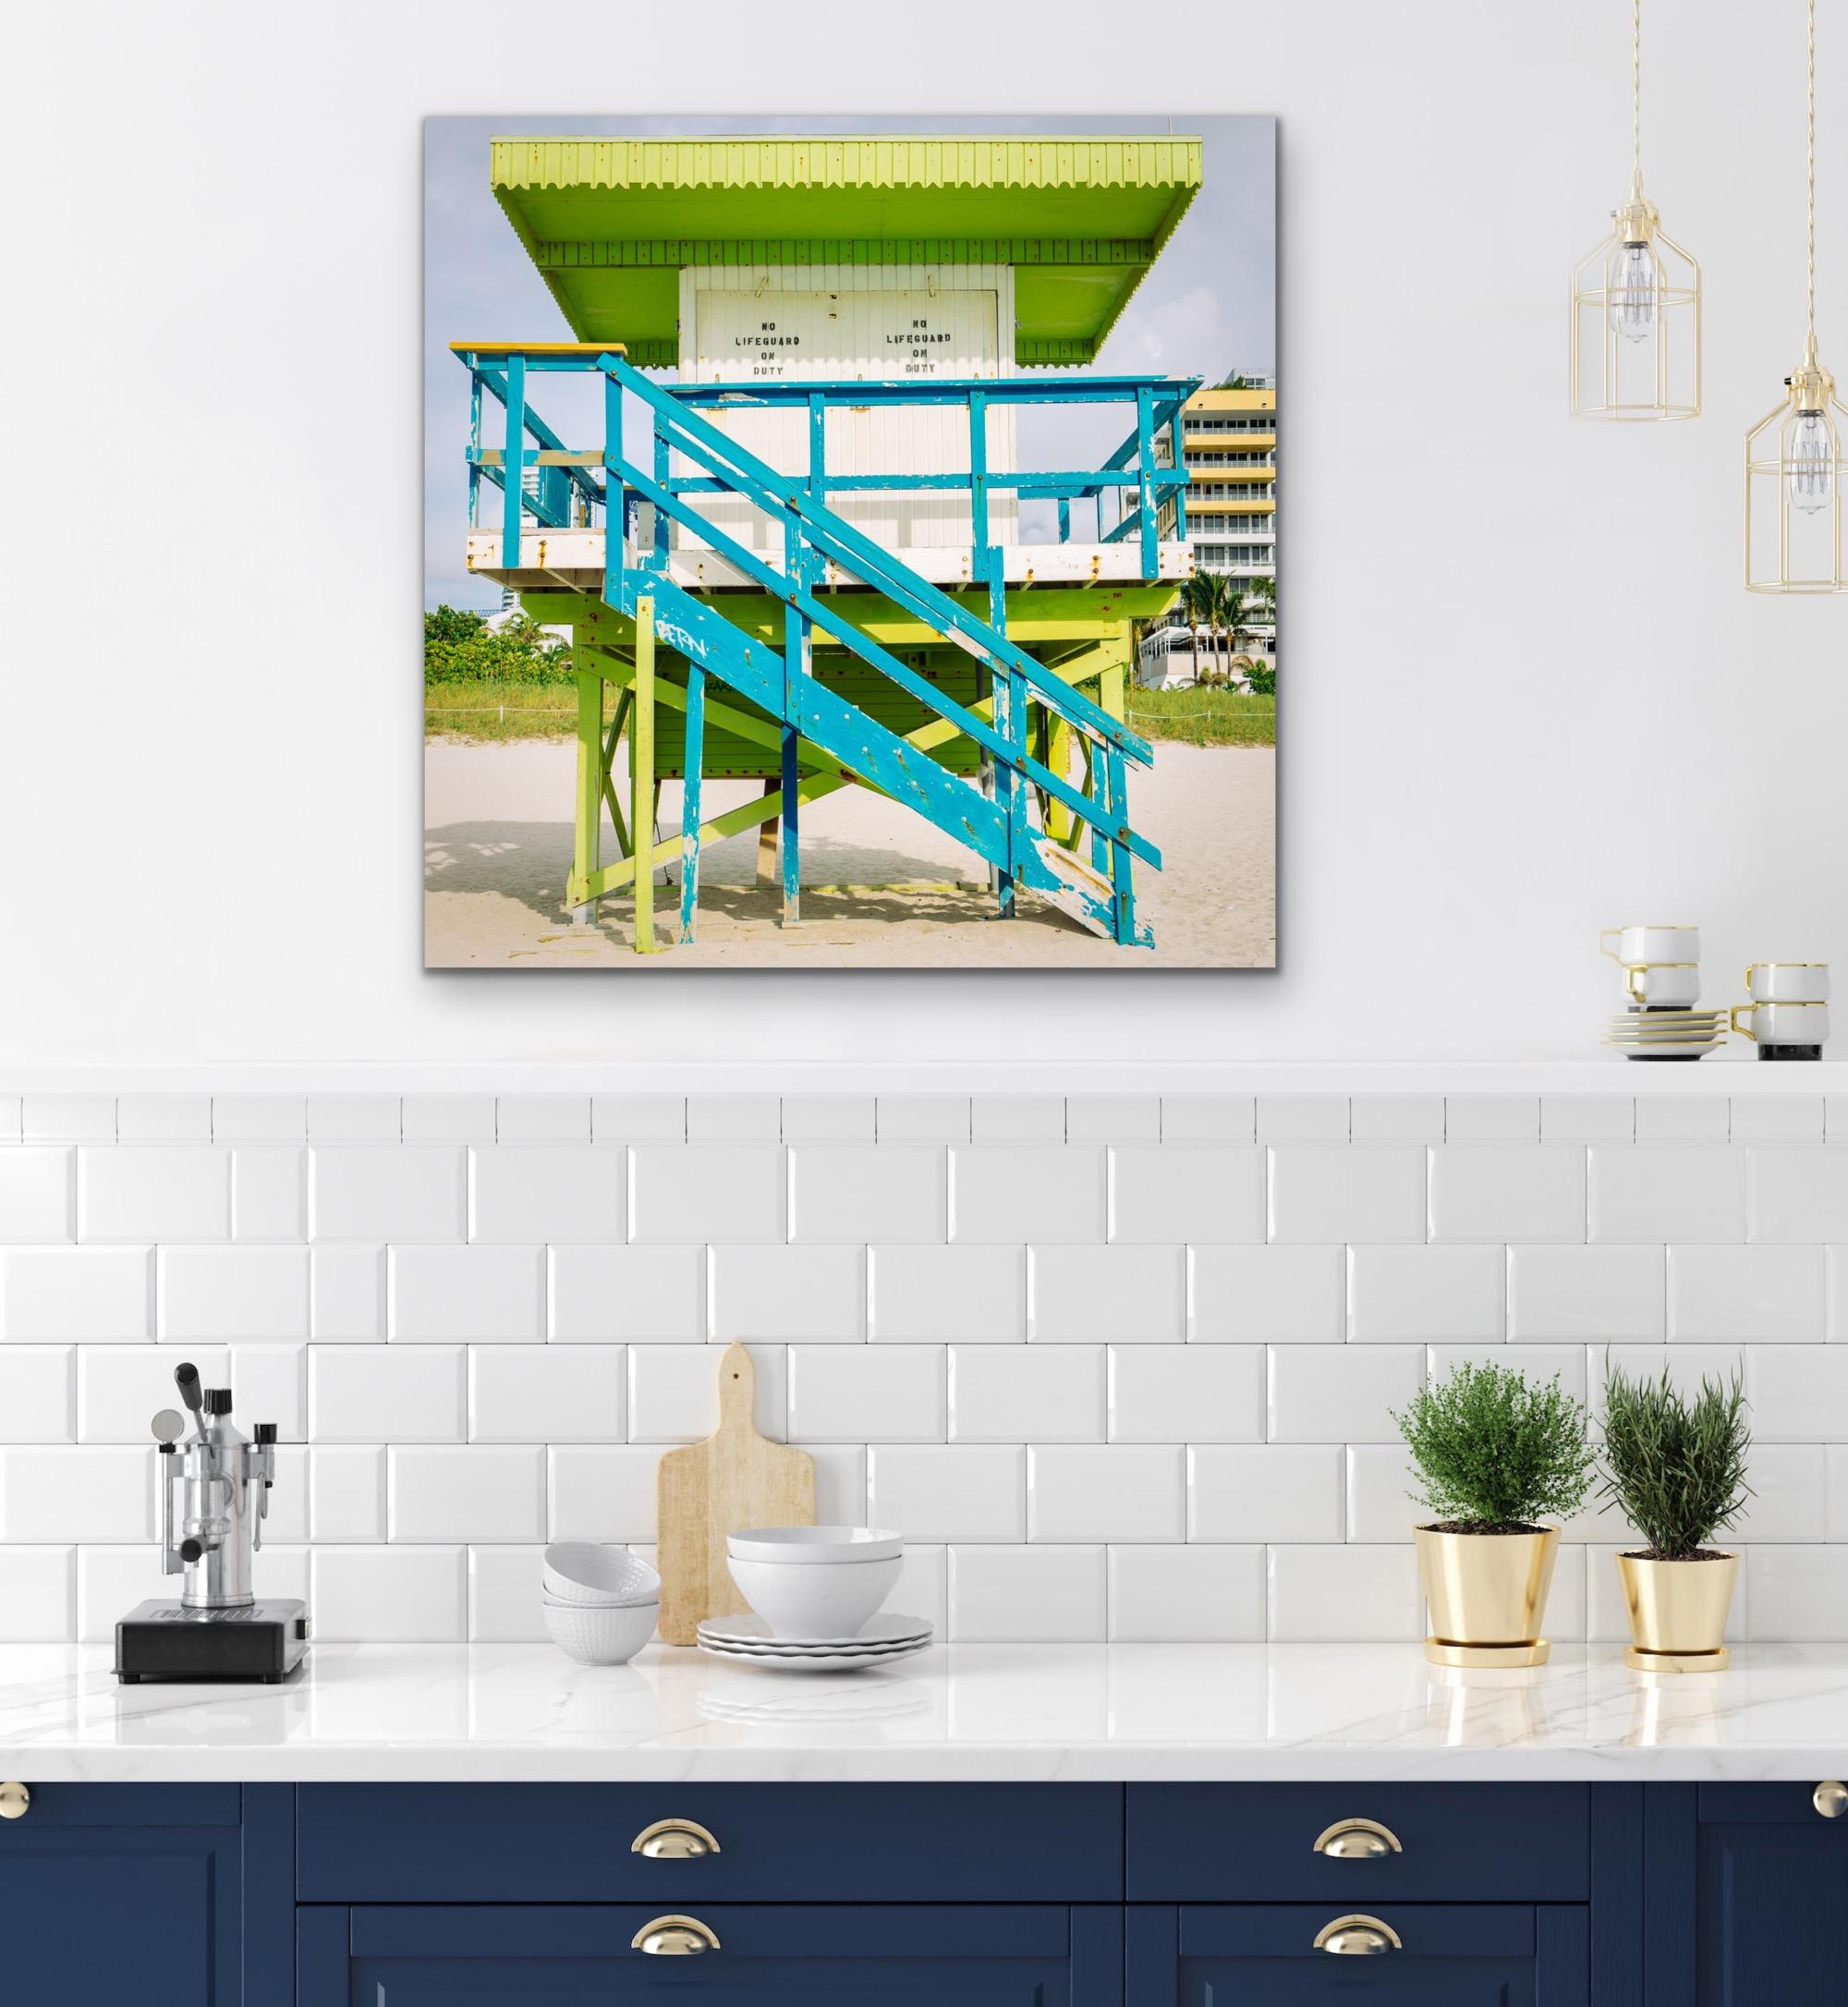 This contemporary coastal photograph by Peter Mendelson depicts a bright blue, lime green and white lifeguard stand  in Miami Beach, Florida. The stand, which has white shut doors that say 